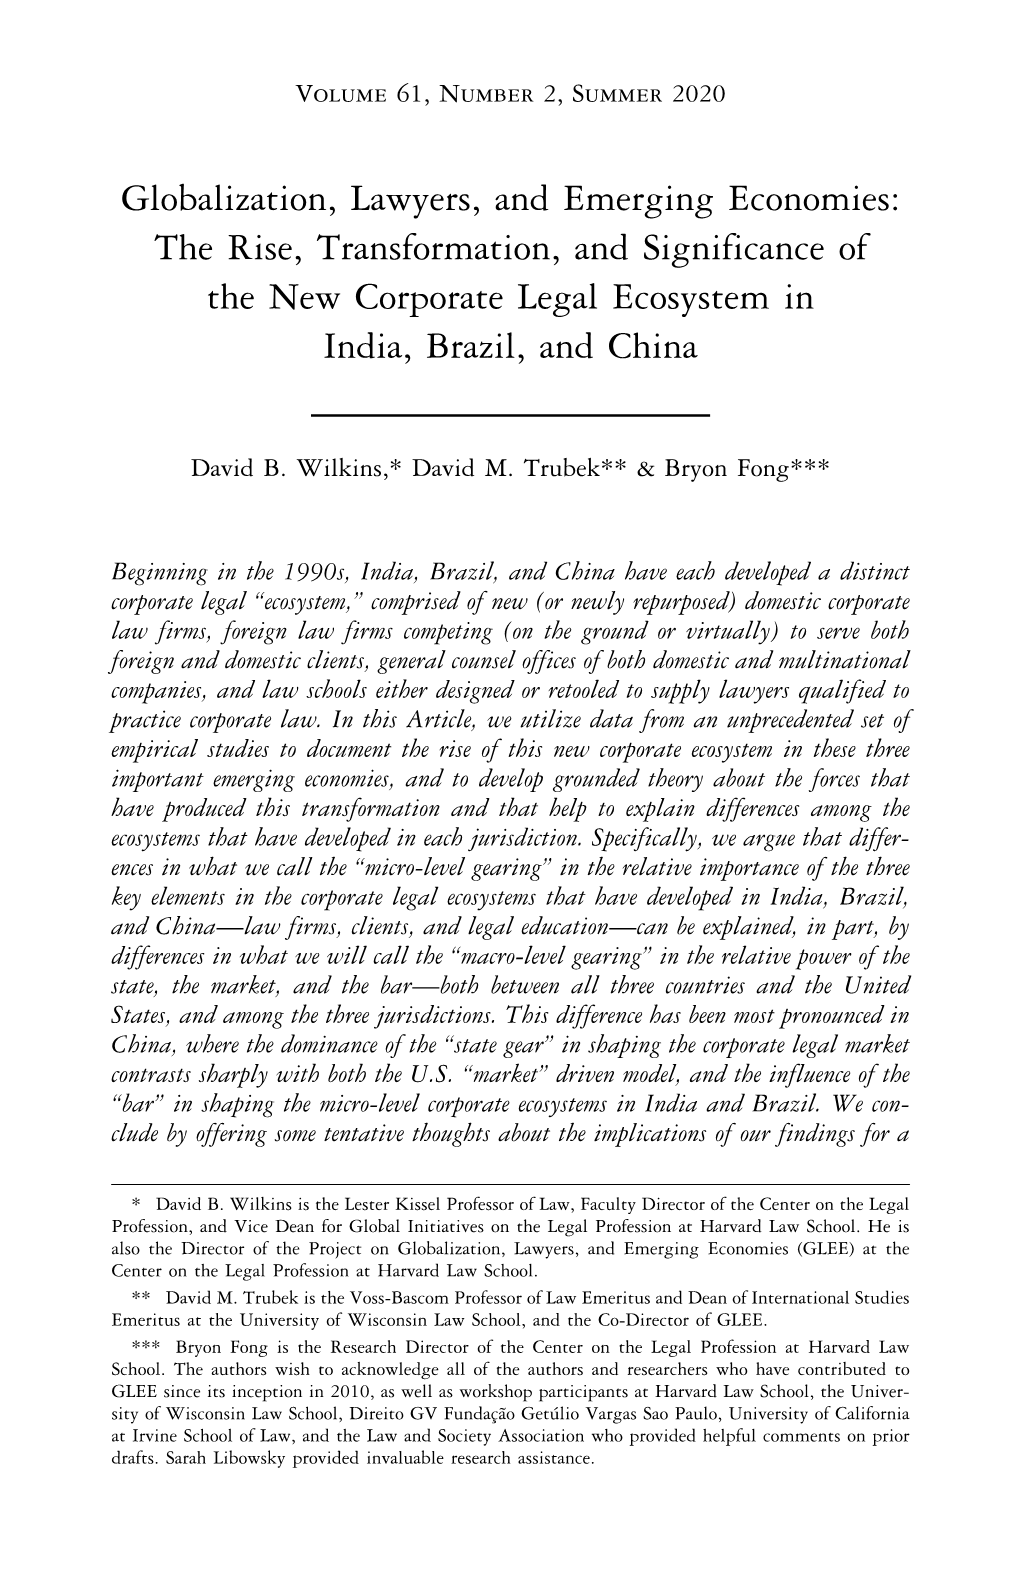 Globalization, Lawyers, and Emerging Economies: the Rise, Transformation, and Significance of the New Corporate Legal Ecosystem in India, Brazil, and China